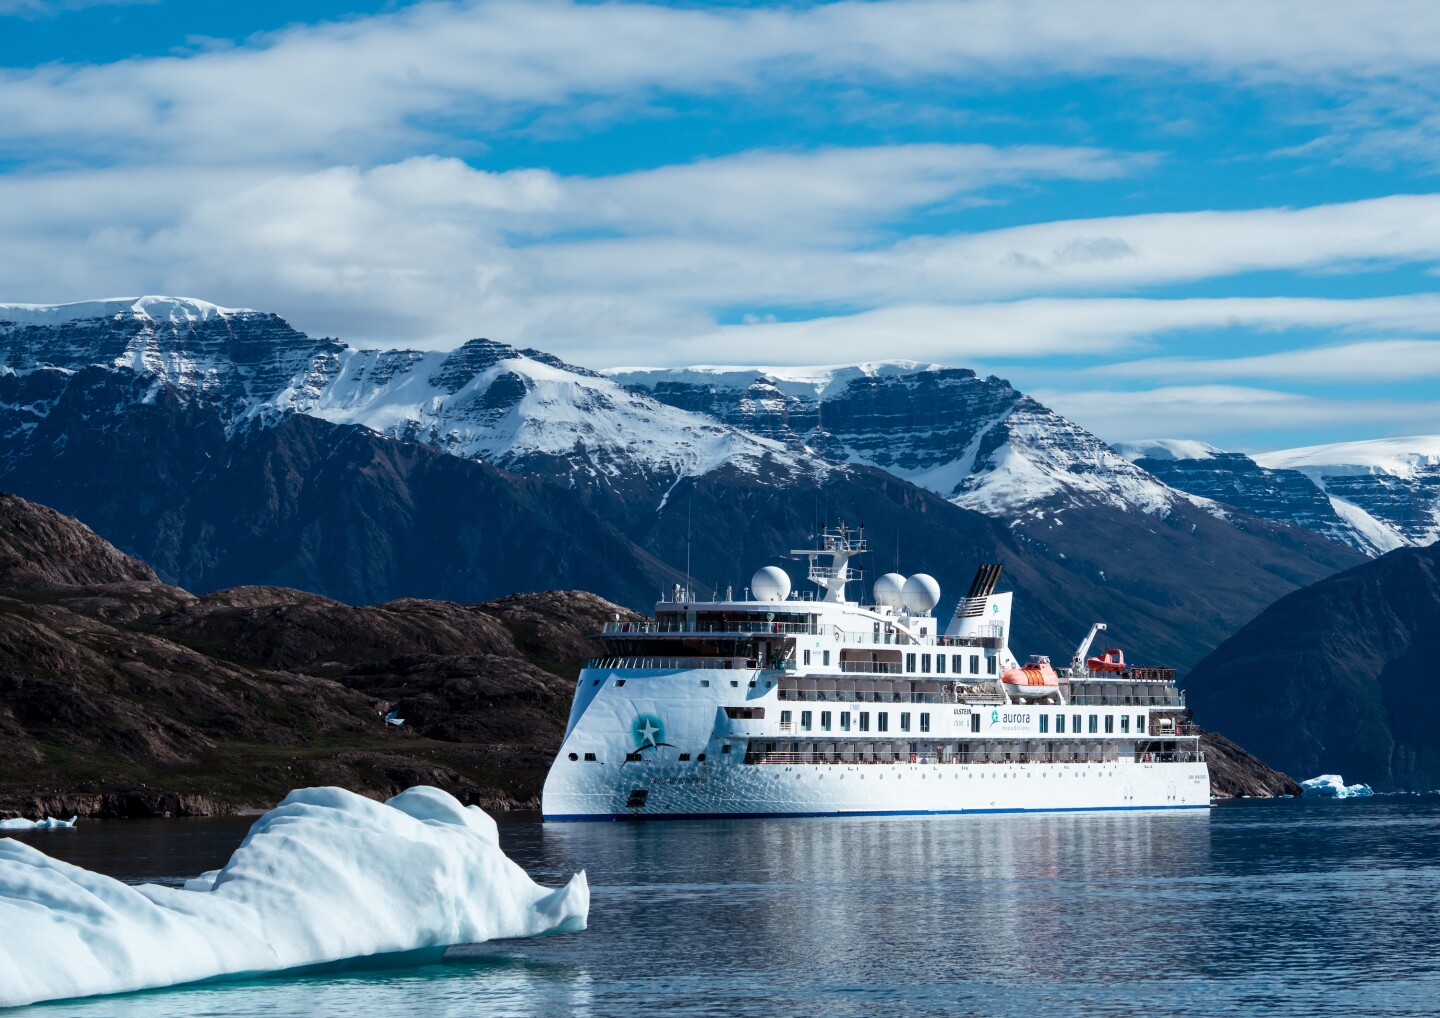 <h2>1. Aurora Expeditions’ “Northern Lights Explorer” cruise</h2> <ul>   <li><b>Cost</b>: From $19,346 per person</li>   <li><b>Days</b>: 19</li>   <li><b>Departure port</b>: Kirkenes, Norway</li>   <li><b>End port</b>: Reykjavík, Iceland</li>   <li><a class="Link" href="https://www.aurora-expeditions.com/expedition/northern-lights-explorer/" rel="noopener"><b>Book now</b></a></li>  </ul> <p>It’s never a guarantee that the Northern Lights will appear—it’s all dependent on the strength of geomagnetic storms on the sun and how clear the sky is where you are. However, given that this sailing lasts 19 days and ping-pongs around remote Arctic sites in Iceland, Greenland, and Norway, your odds are pretty good of seeing the night sky ignited by ribbons of color at least a few times.<br>The sailing starts in Kirkenes, on the northern coast of Norway, and spends the first six days hugging the coastline, sailing past fishing villages and granite peaks, and making stops in the Lofoten Islands and other small towns. Then it’s on to the Norwegian island of Jan Mayen, just north of Iceland, which is also an excellent place for spotting whales and dolphins, before sliding over to the glacier-covered eastern coast of Greenland for four days of Zodiac excursions and hiking along the tundra. One of the highlights is visiting the Inuit village Ittoqqortoormiit, the region’s most isolated and northernmost permanent settlement, with its gregarious locals and scores of Greenlandic sled dogs. </p> <p>From there, you’ll visit the Westfjords region of Iceland (the northwestern peninsula), with its colorful small towns, turbulent waterfalls, and fjords rich in bird-viewing opportunities. The final days before disembarkation in Bergen, Norway, will be spent in the Faroe Islands. There you’ll find traditional red-painted timber homes with grass roofs, lots of sheep and Faroese ponies, Viking history, and imposing sea cliffs.</p> <p>Because it’s often chilly in this part of the world (especially at night), each passenger is given a waterproof polar expedition jacket upon arrival. The sailings will take place on the expedition vessel <i>Greg Mortimer</i>, which can hold 132 passengers in 79 cabins (most have private balconies for auroral viewing). The sailing runs from September 8 to 26, 2024.</p>